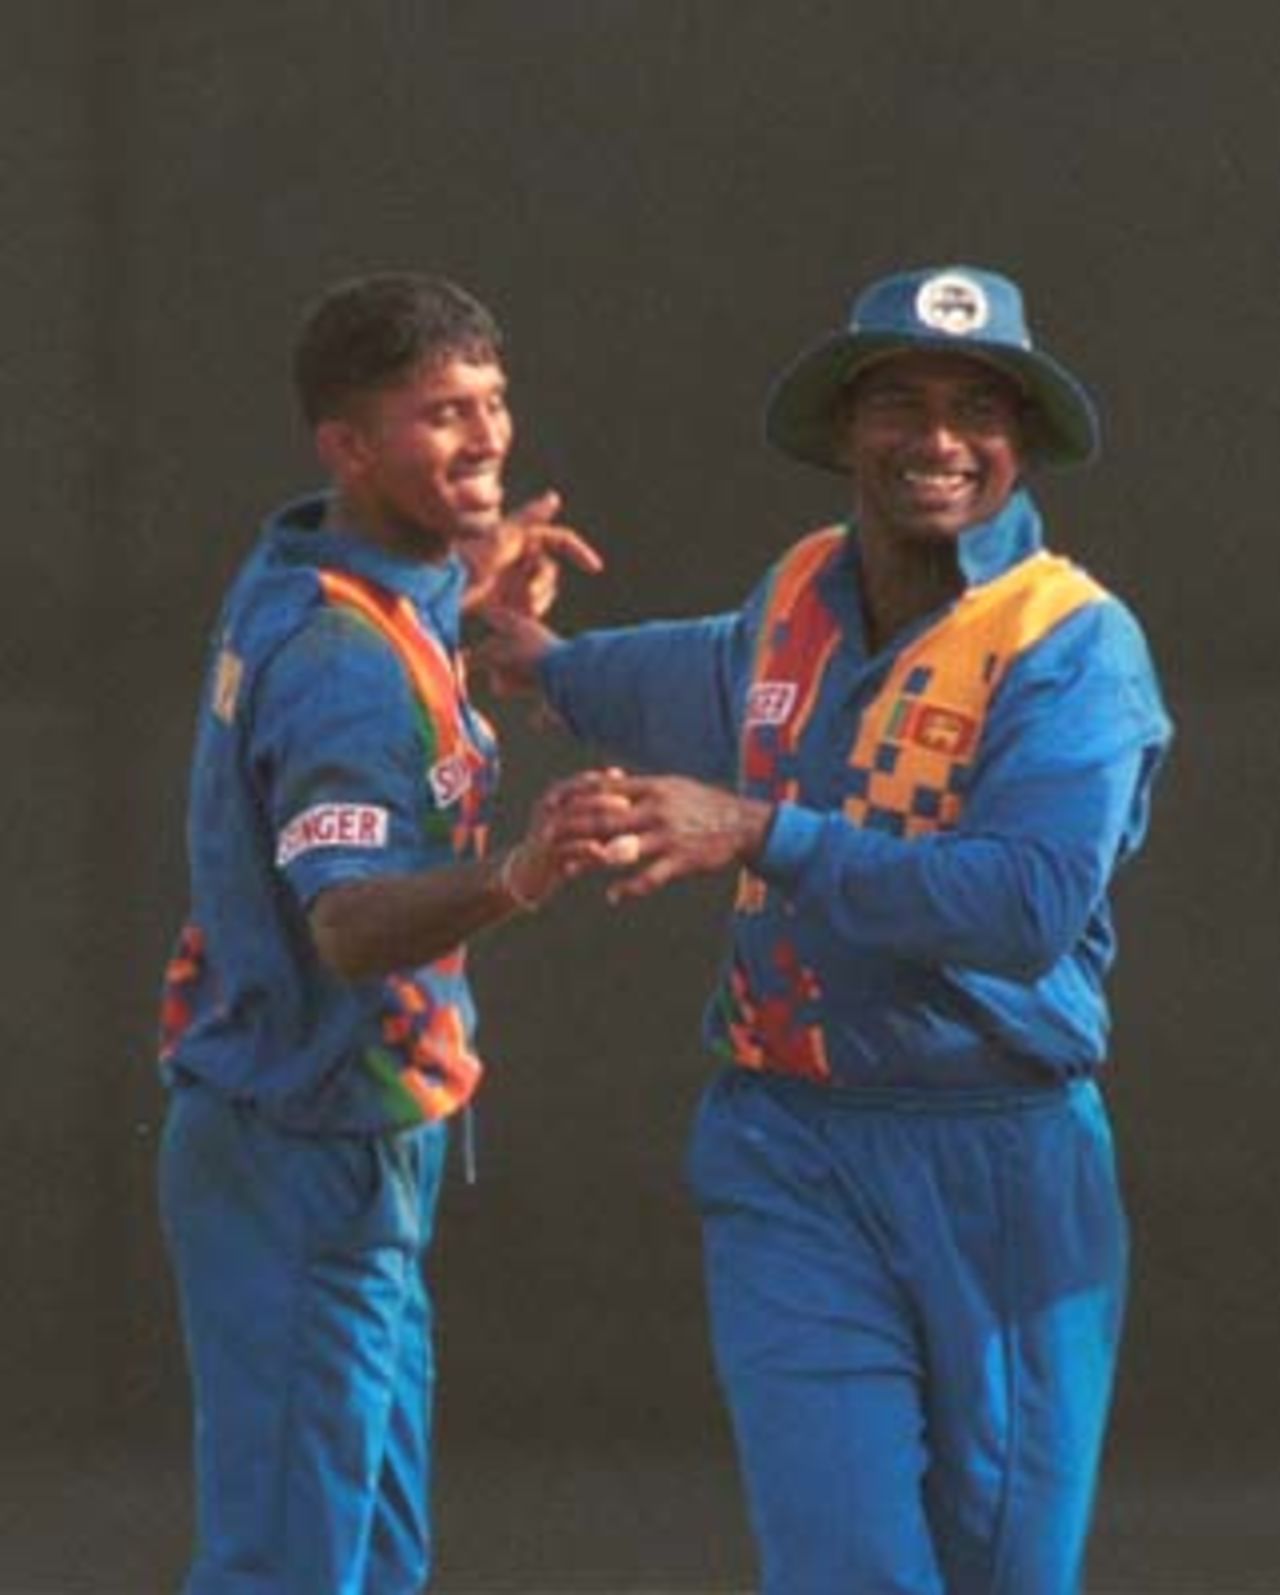 Sri Lankan cricketers celebrate during the Singer Cup Triangular limited overs cricket match against South Africa in Galle International stadium in Galle Sri Lanka on Thursday, July. 6, 2000